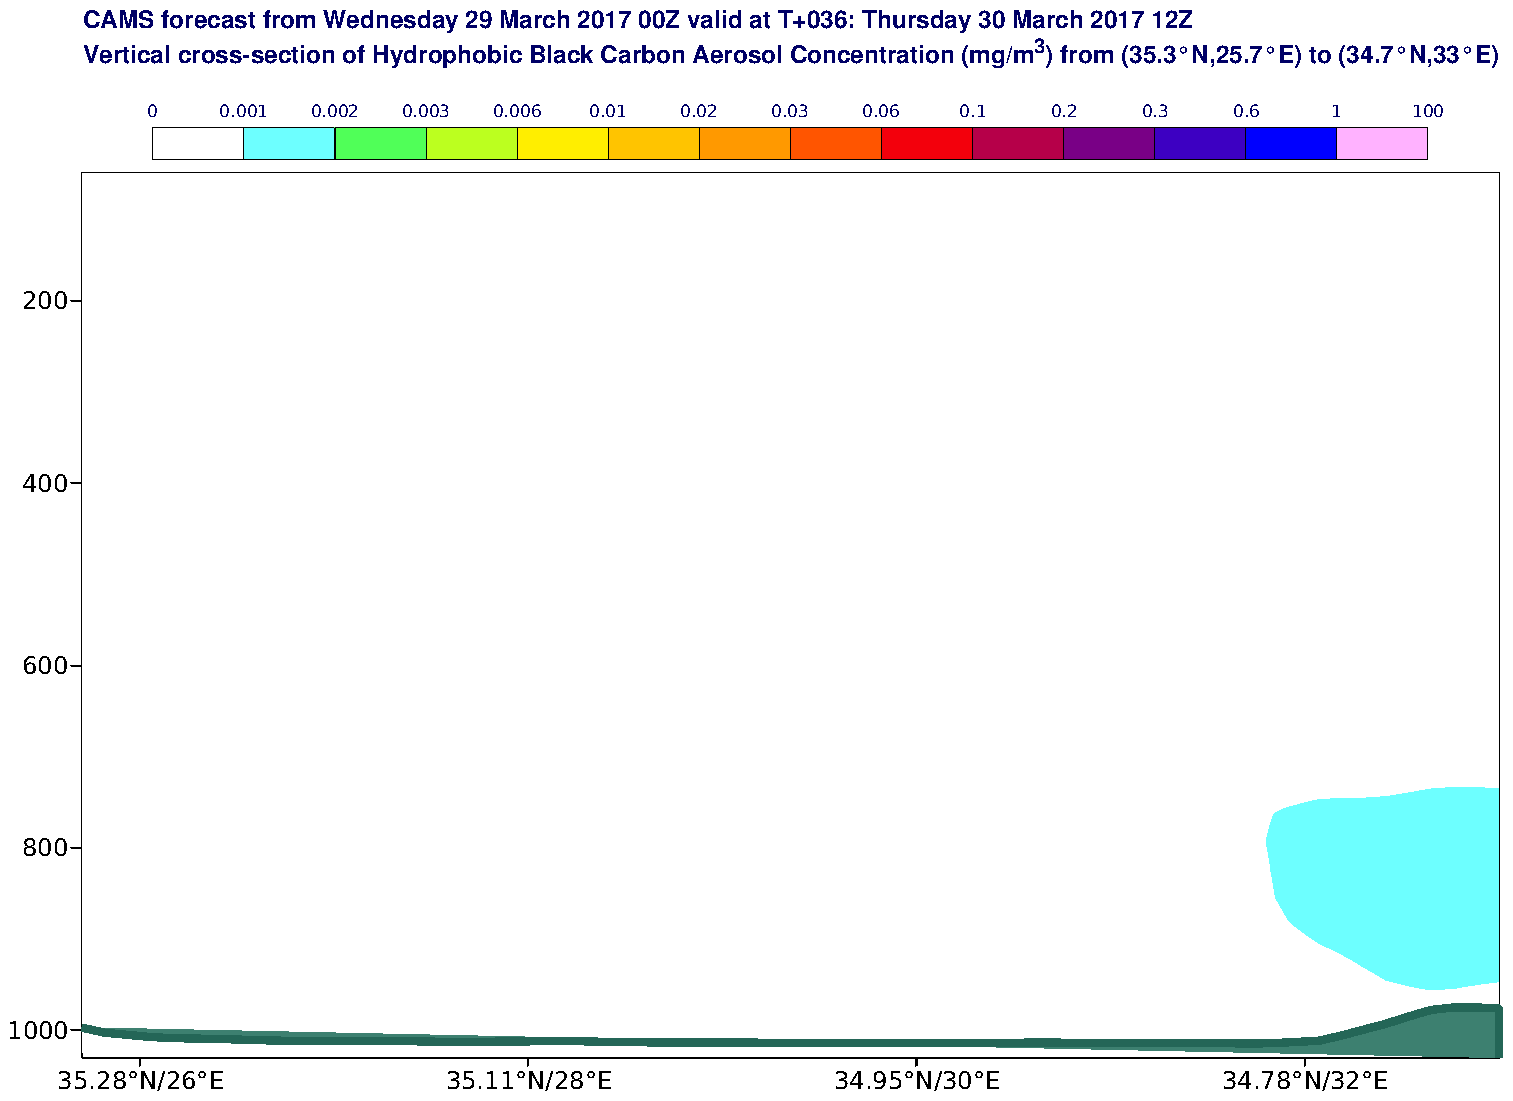 Vertical cross-section of Hydrophobic Black Carbon Aerosol Concentration (mg/m3) valid at T36 - 2017-03-30 12:00